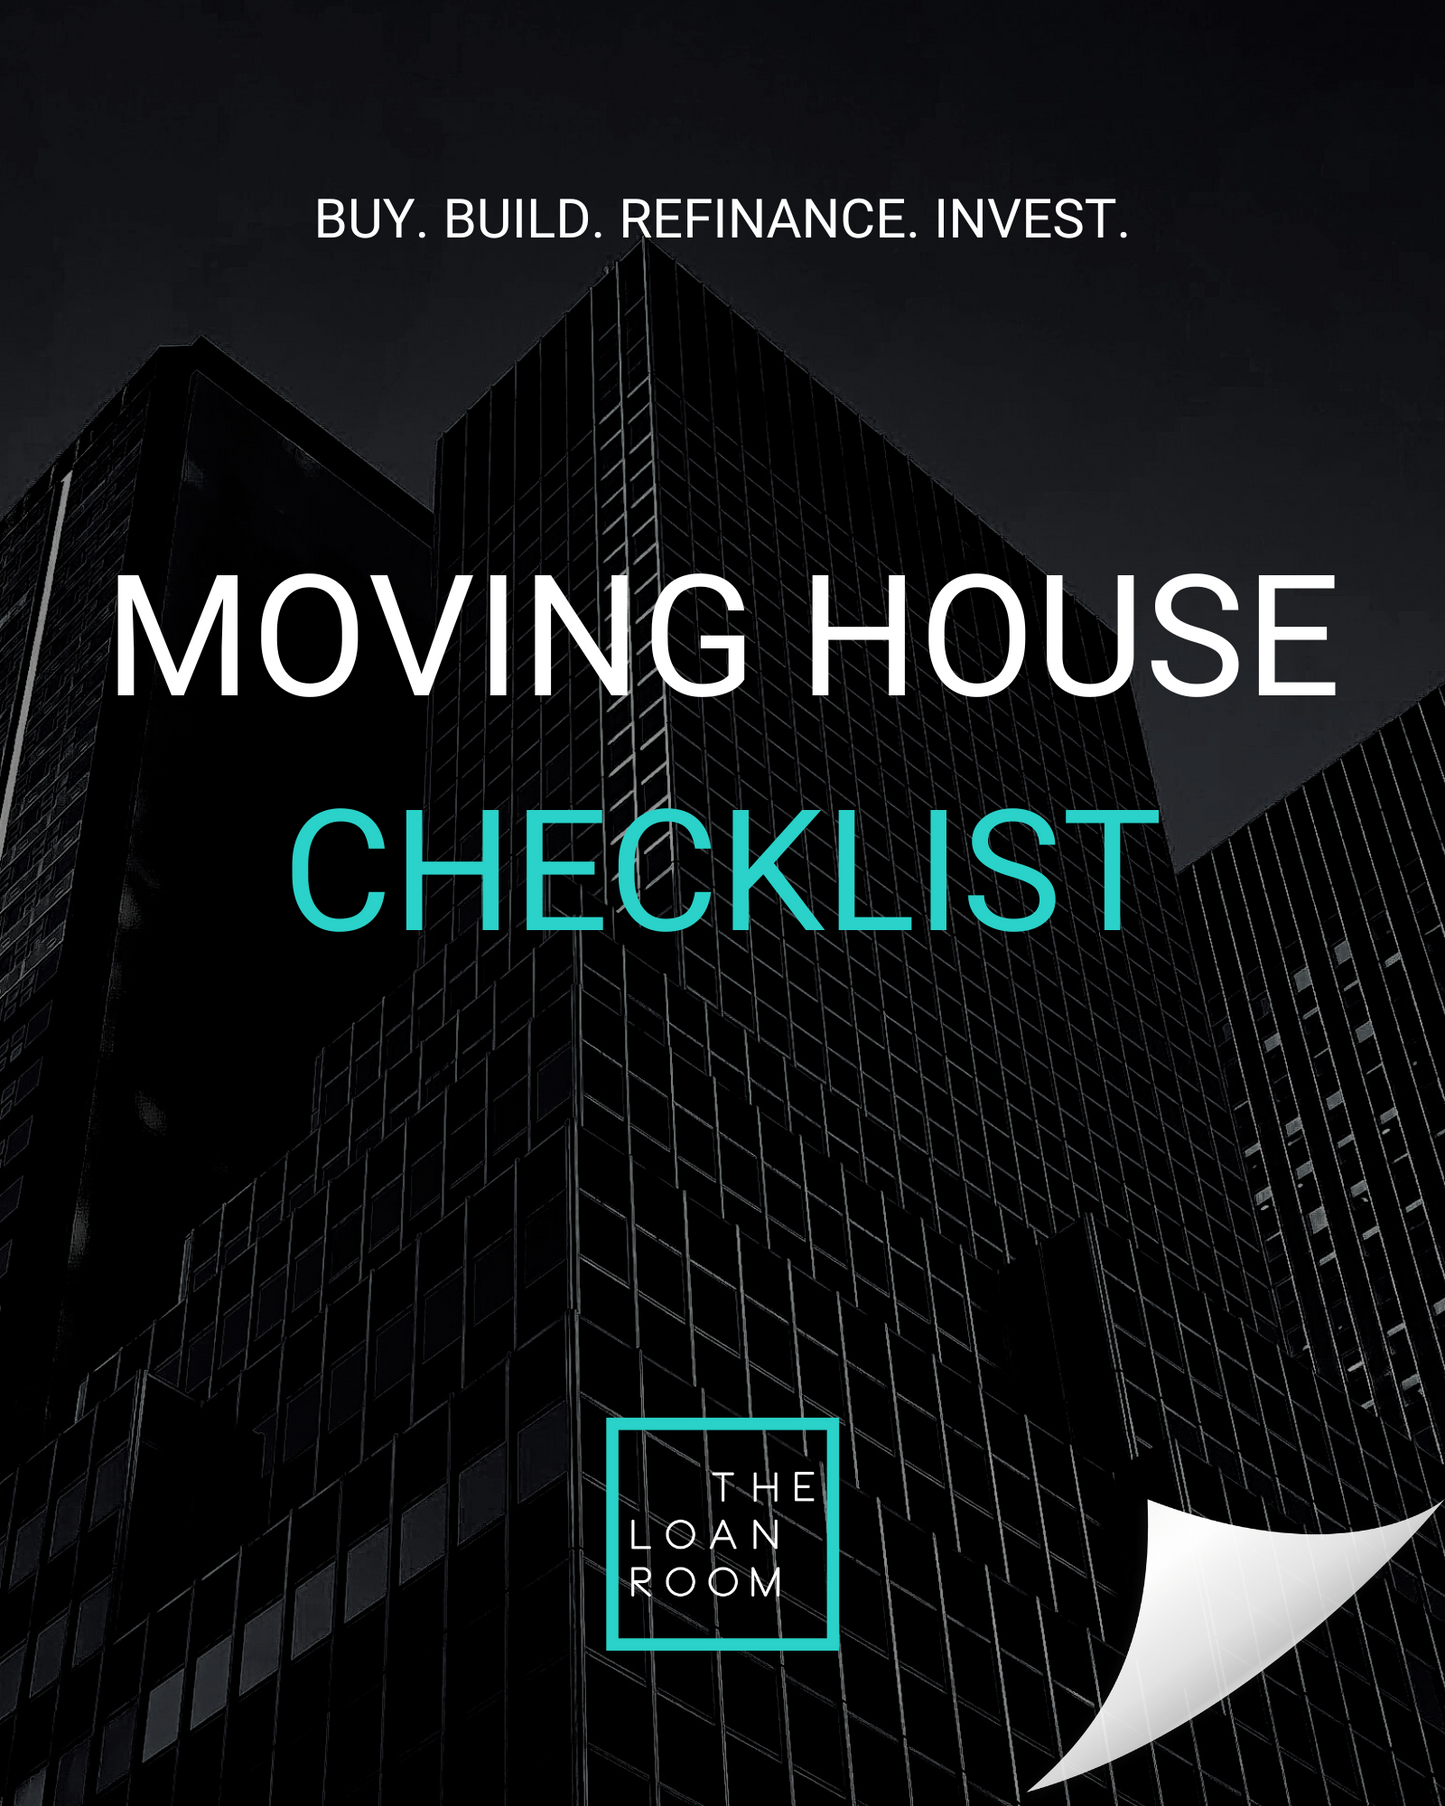 MOVING HOUSE CHECKLIST